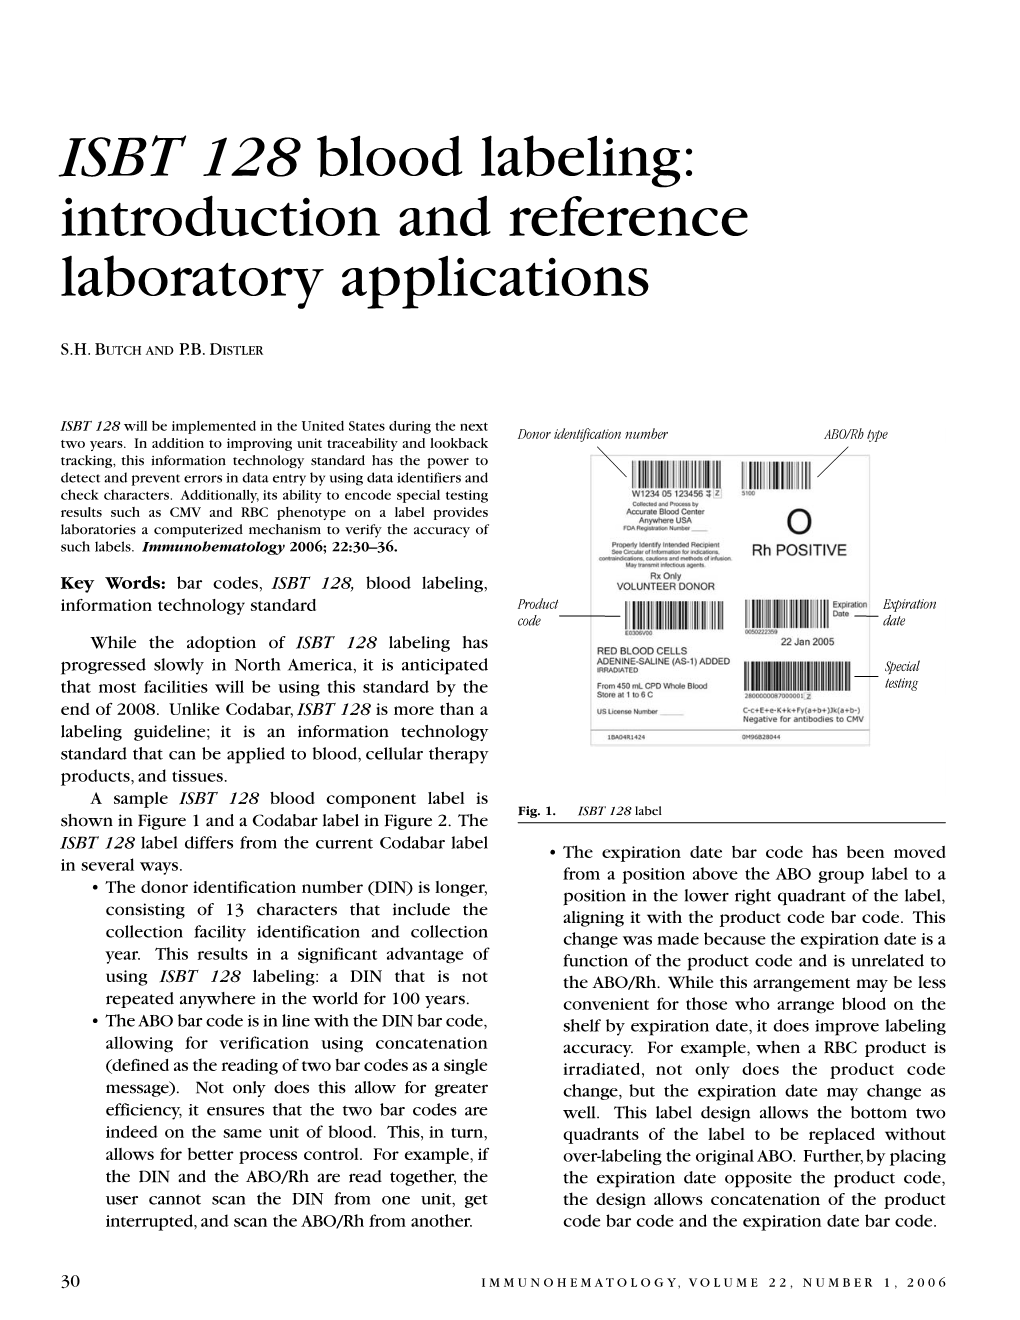 ISBT 128 Blood Labeling: Introduction and Reference Laboratory Applications